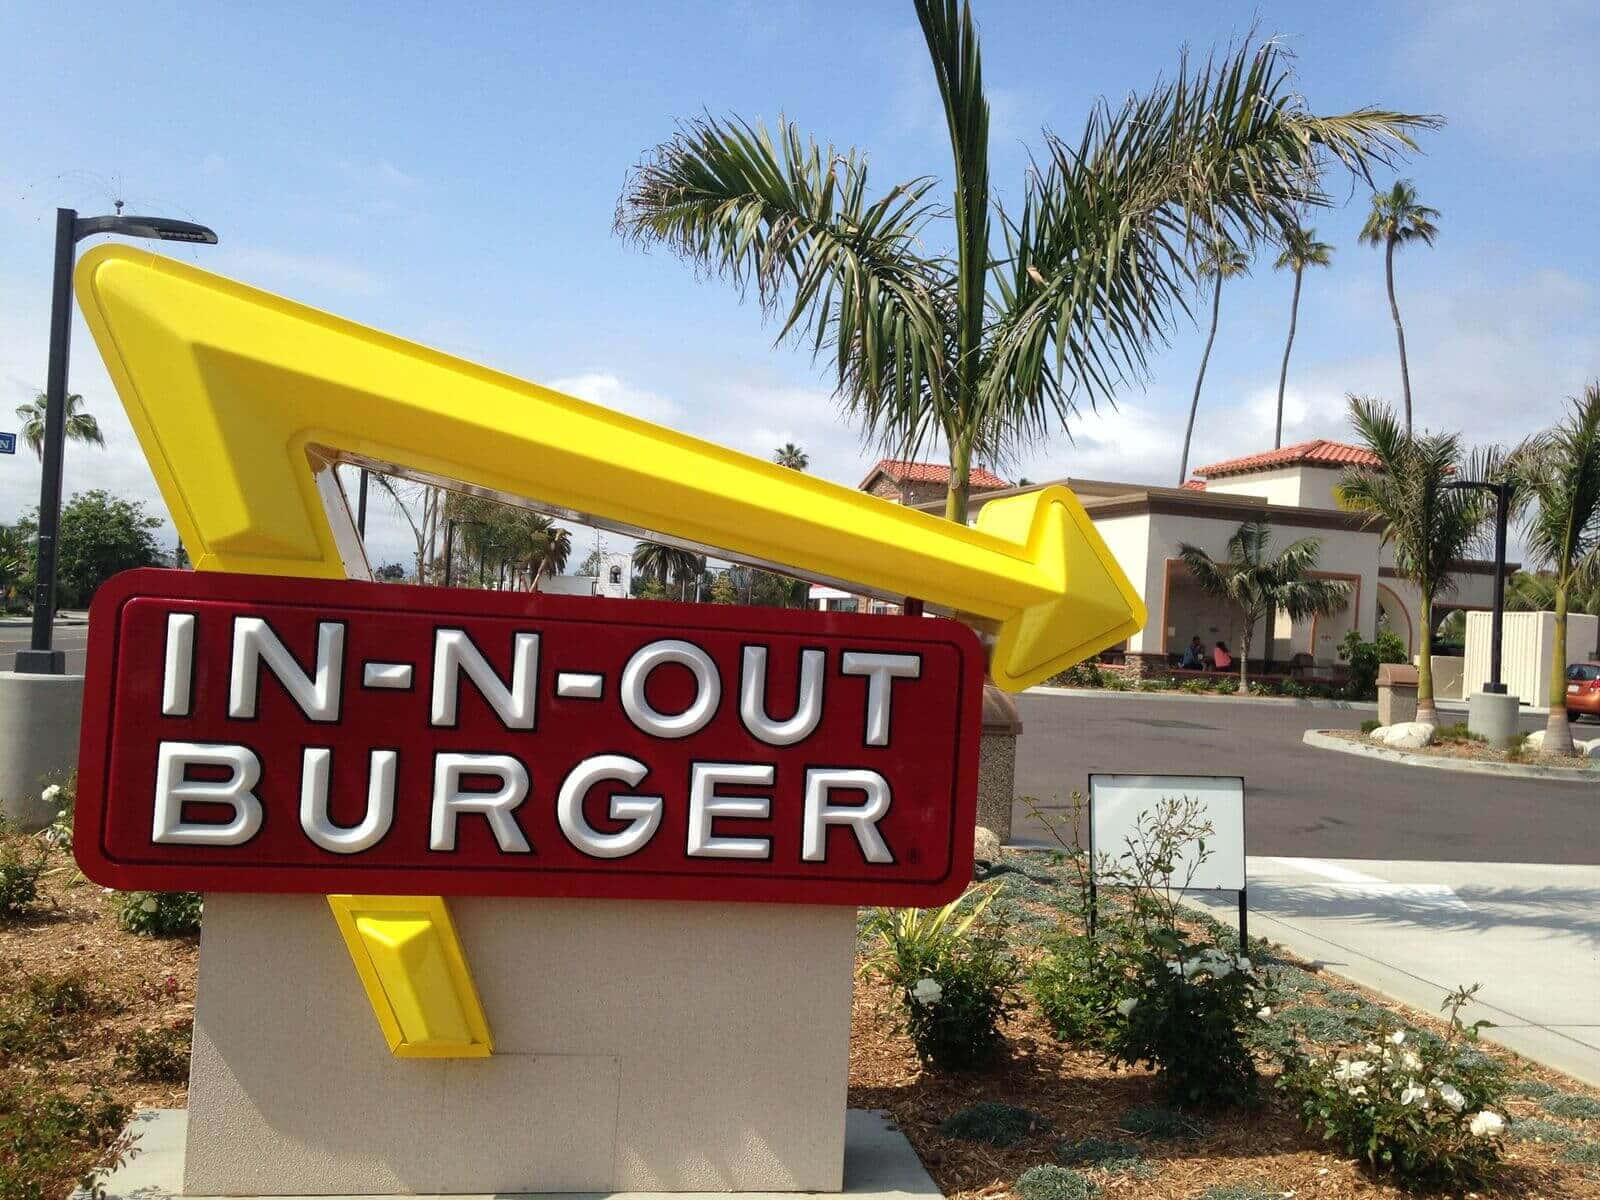 38 In N Out Lax Stock Photos HighRes Pictures and Images  Getty Images